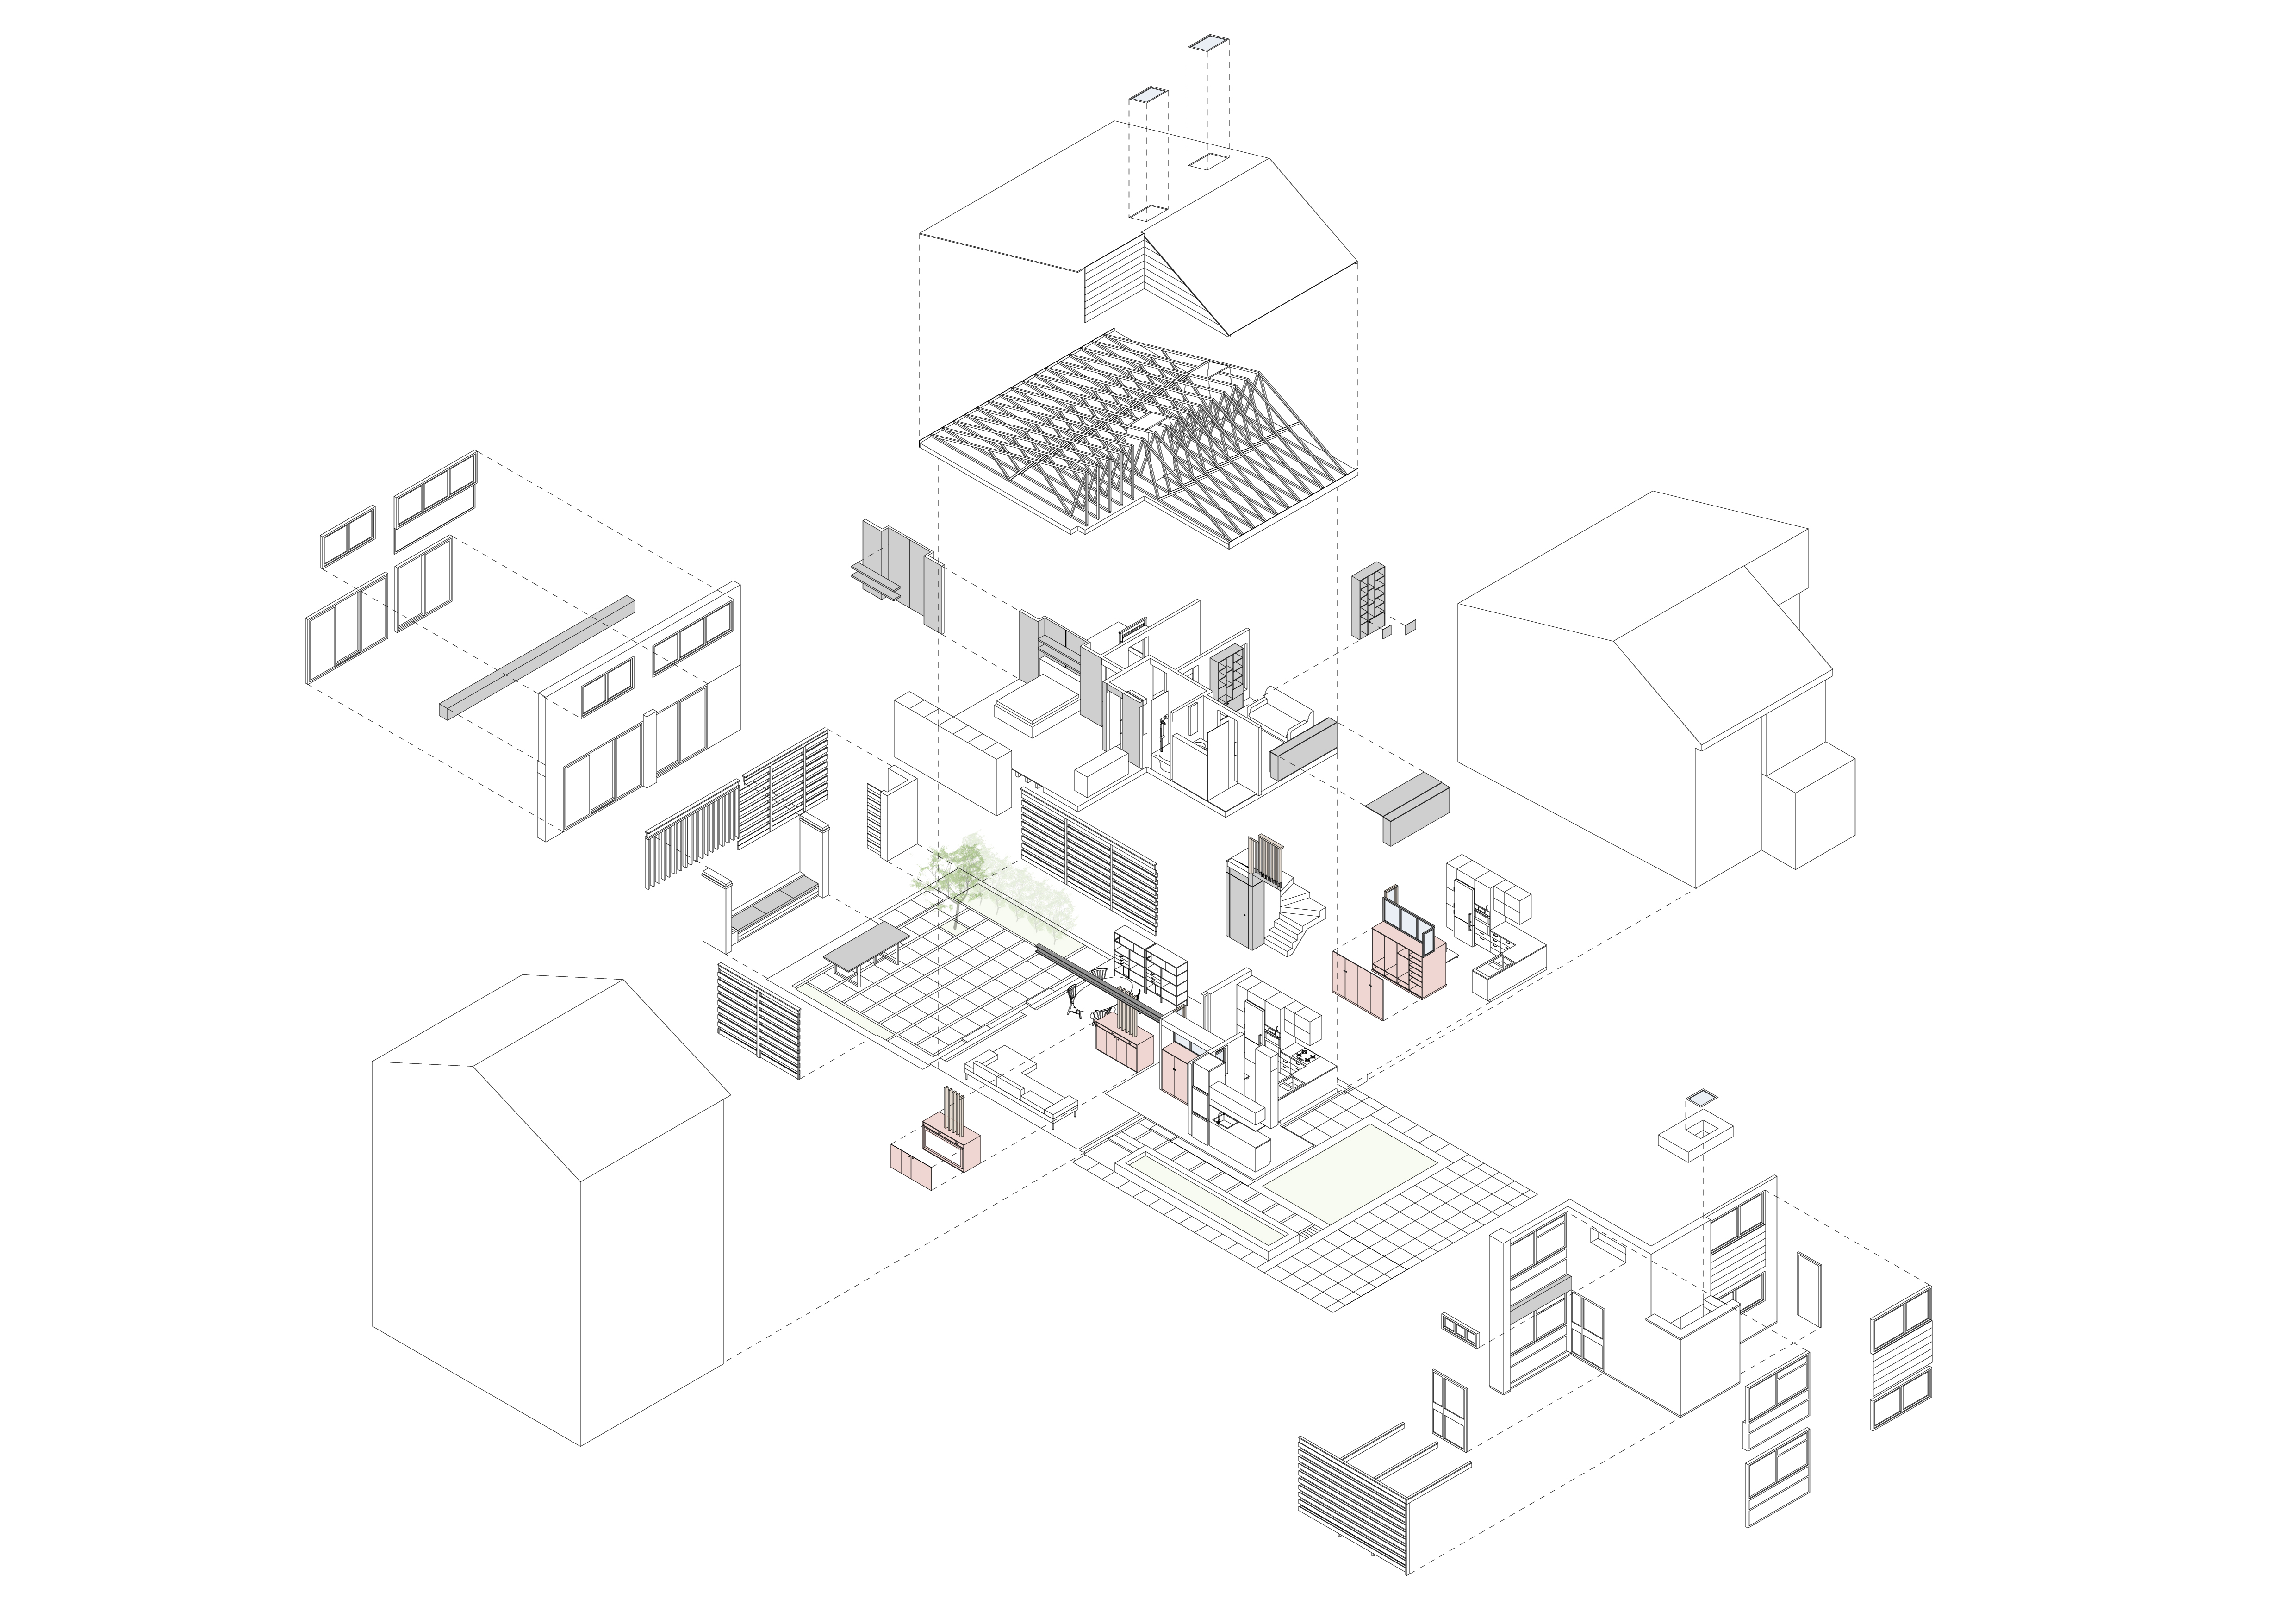 london atelier exploded axometric drawing technical design